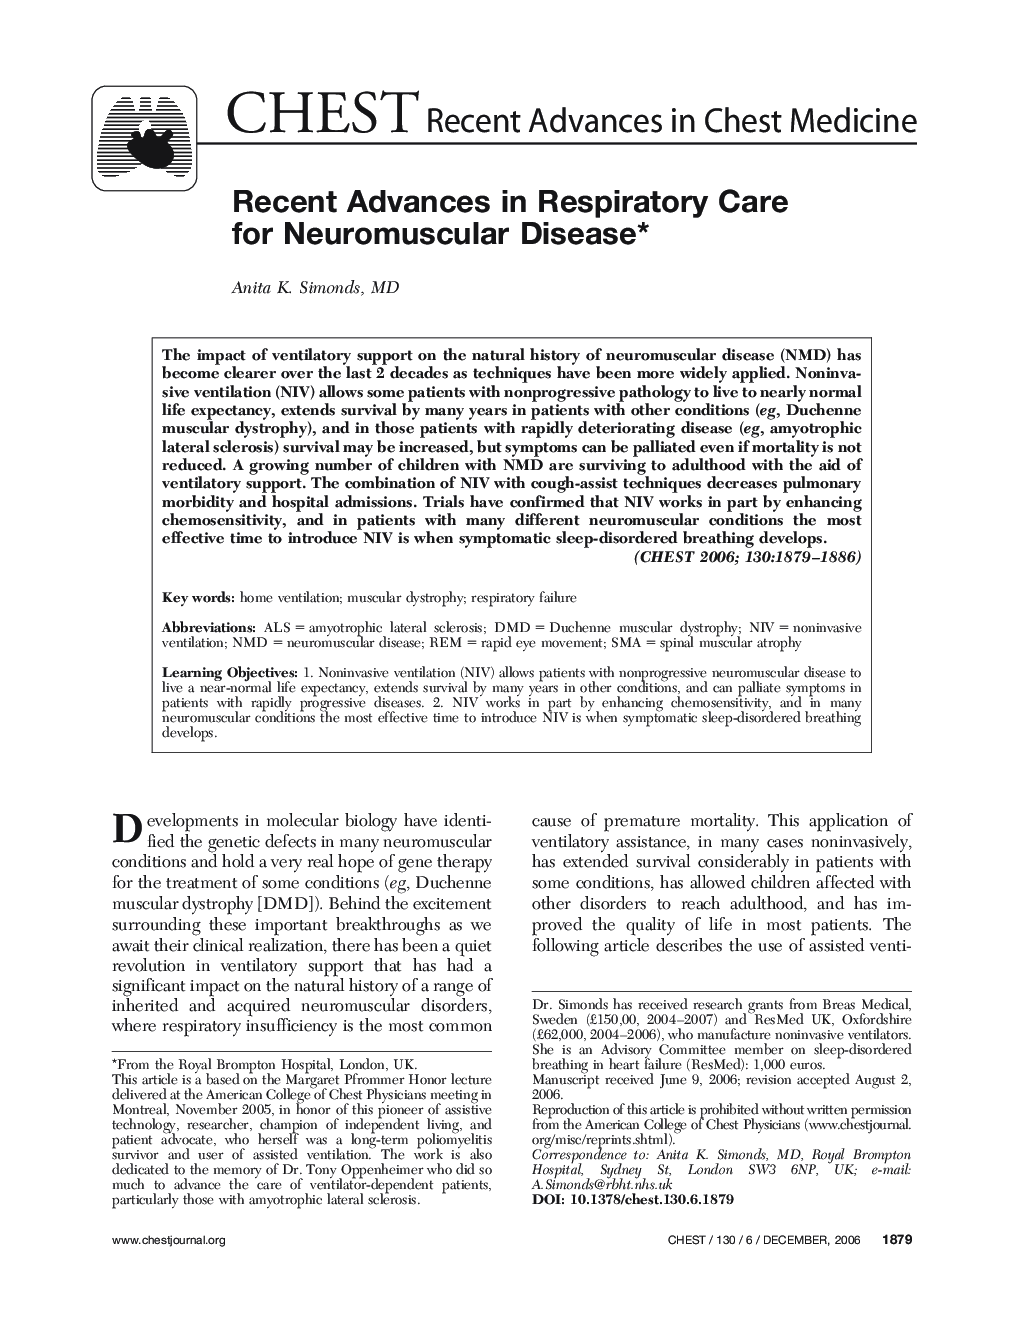 Recent Advances in Respiratory Care for Neuromuscular Disease 